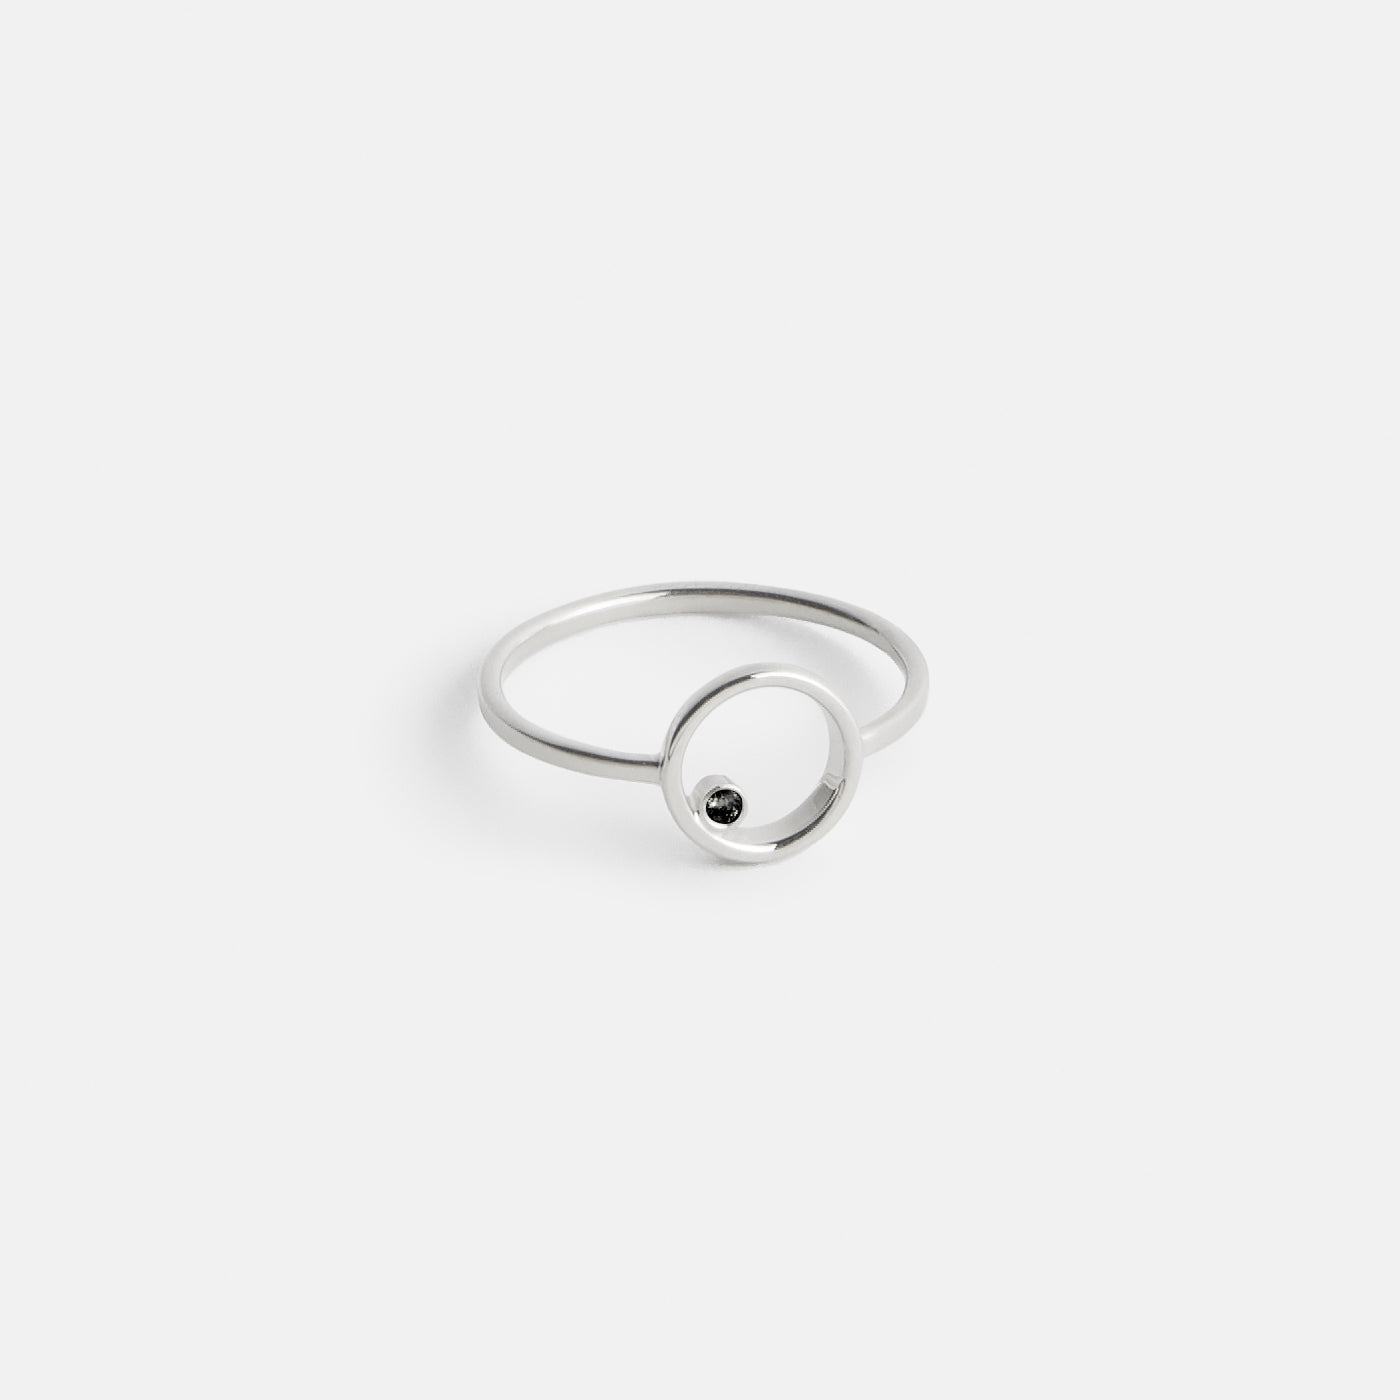 Ila Thin Ring in Sterling Silver set with Black Diamond by SHW Fine Jewelry New York City